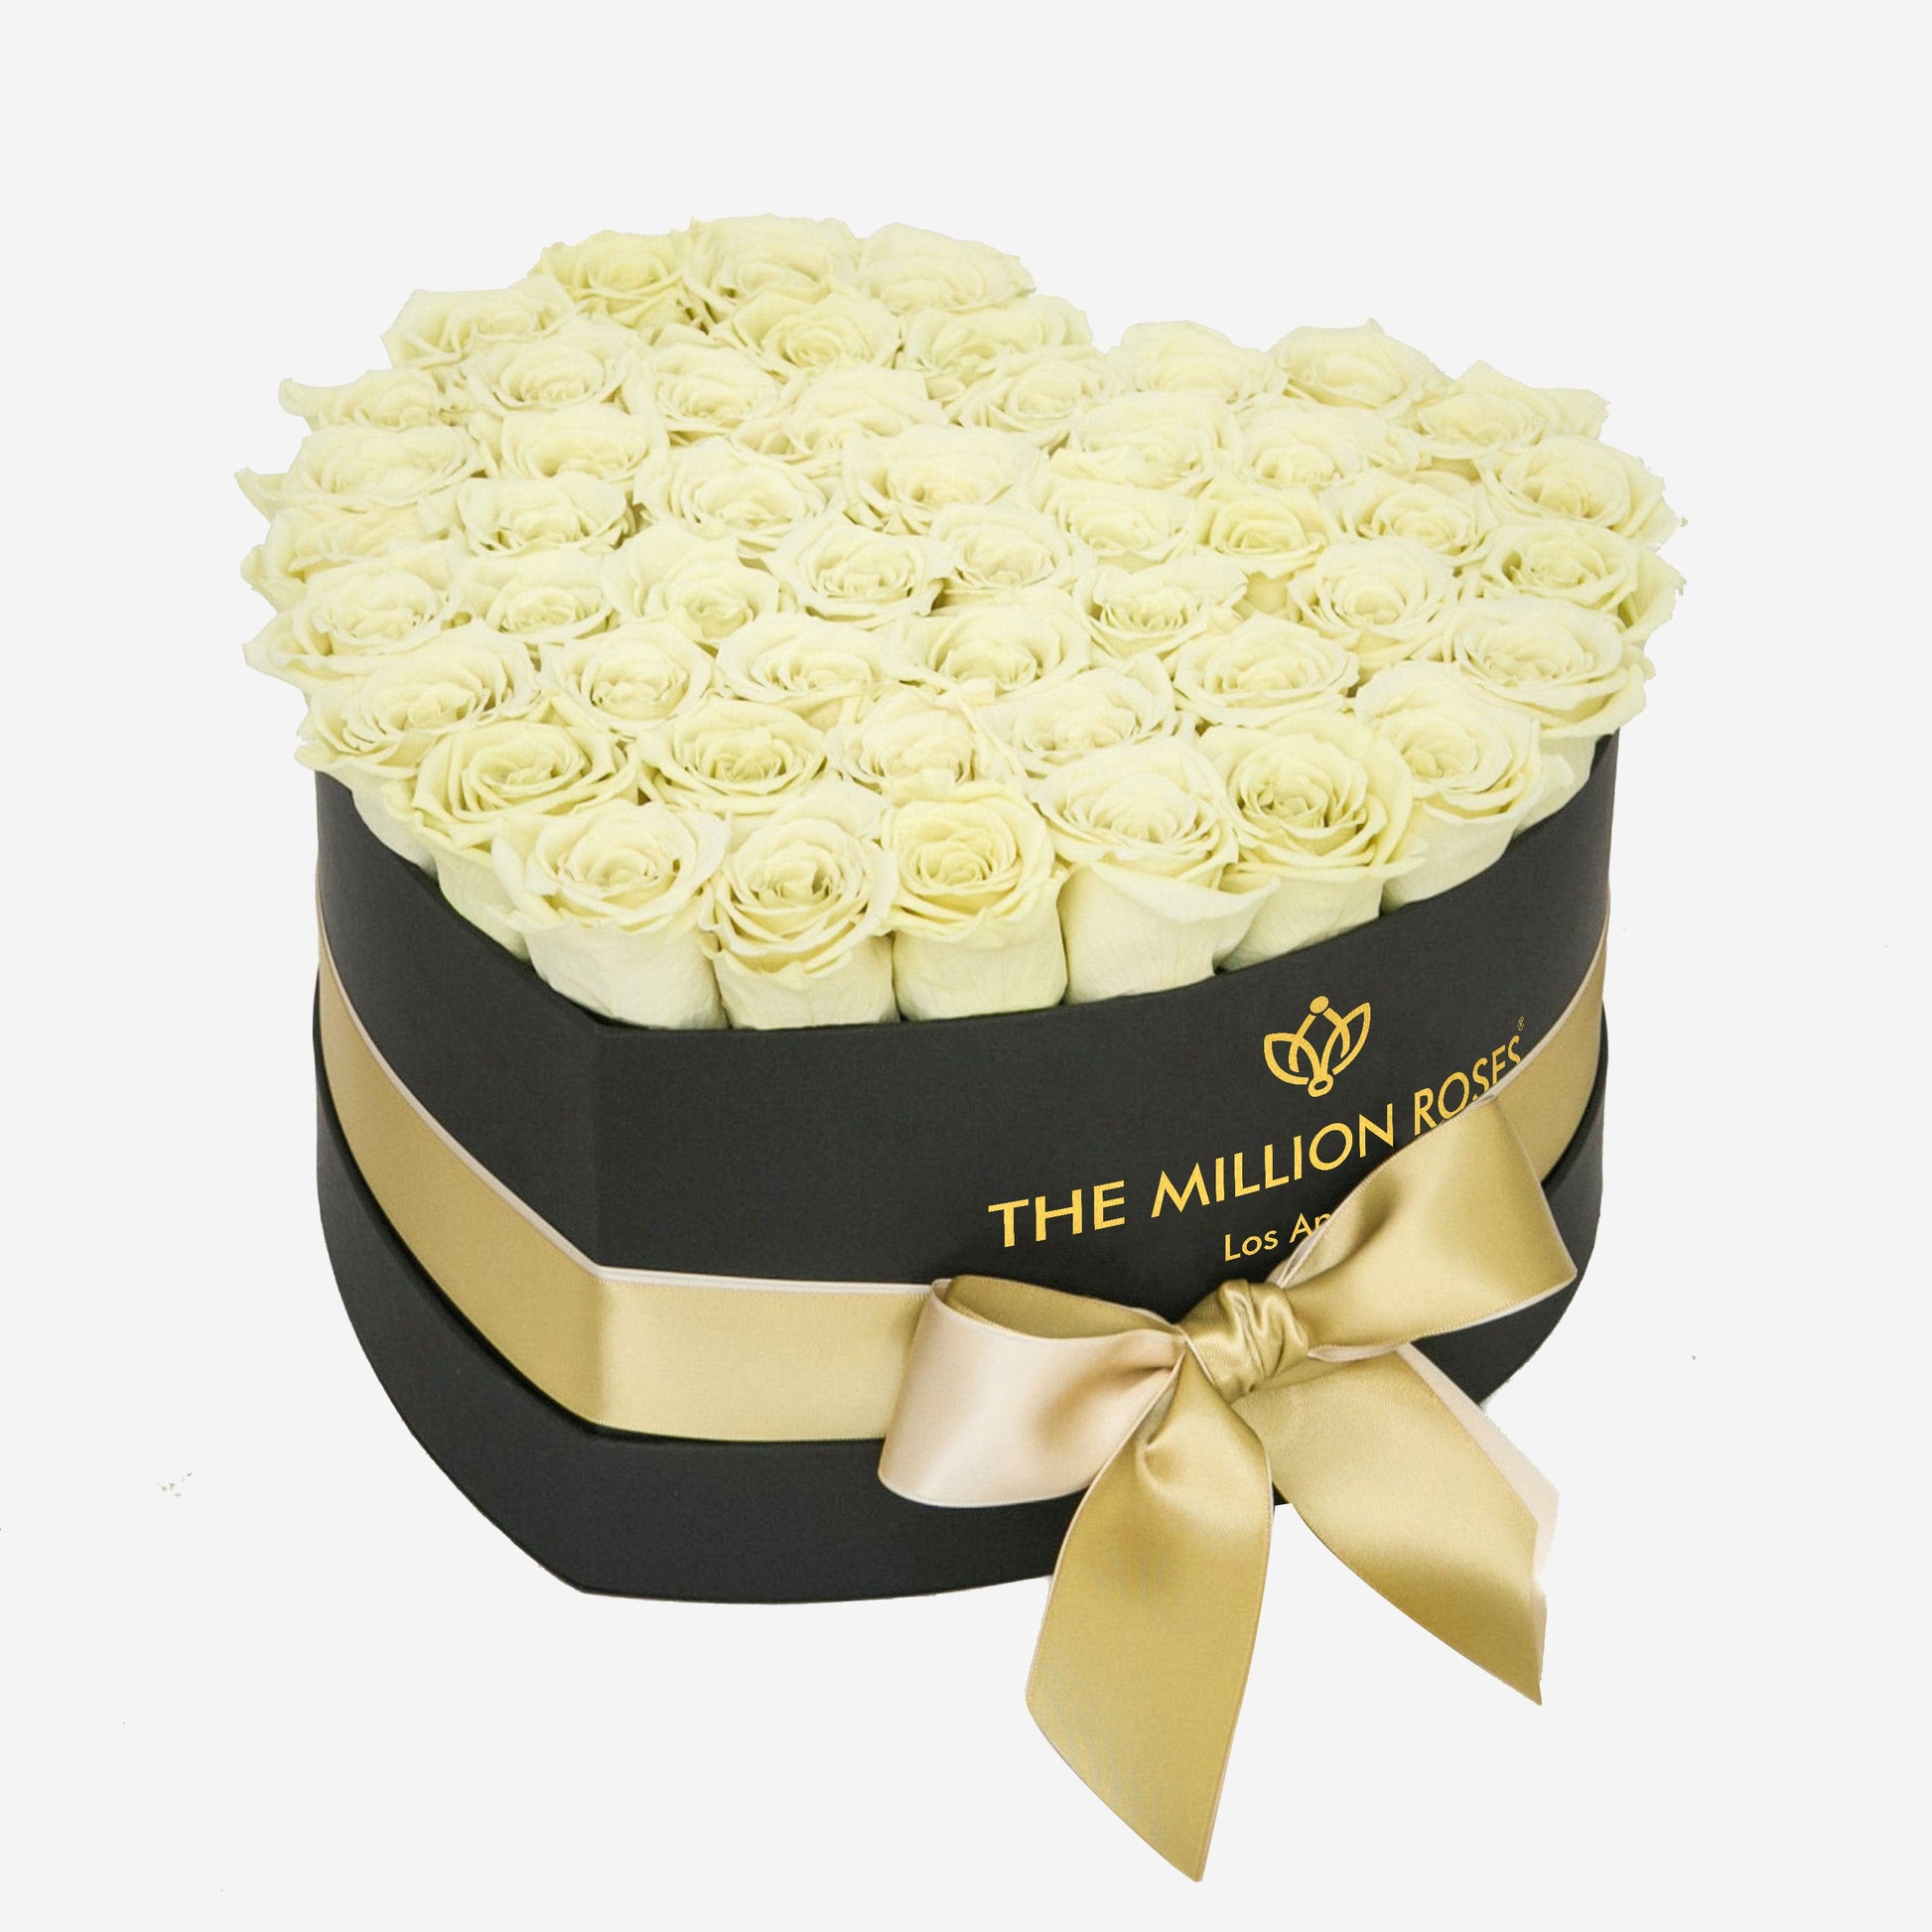 The Ivory Rose Gift